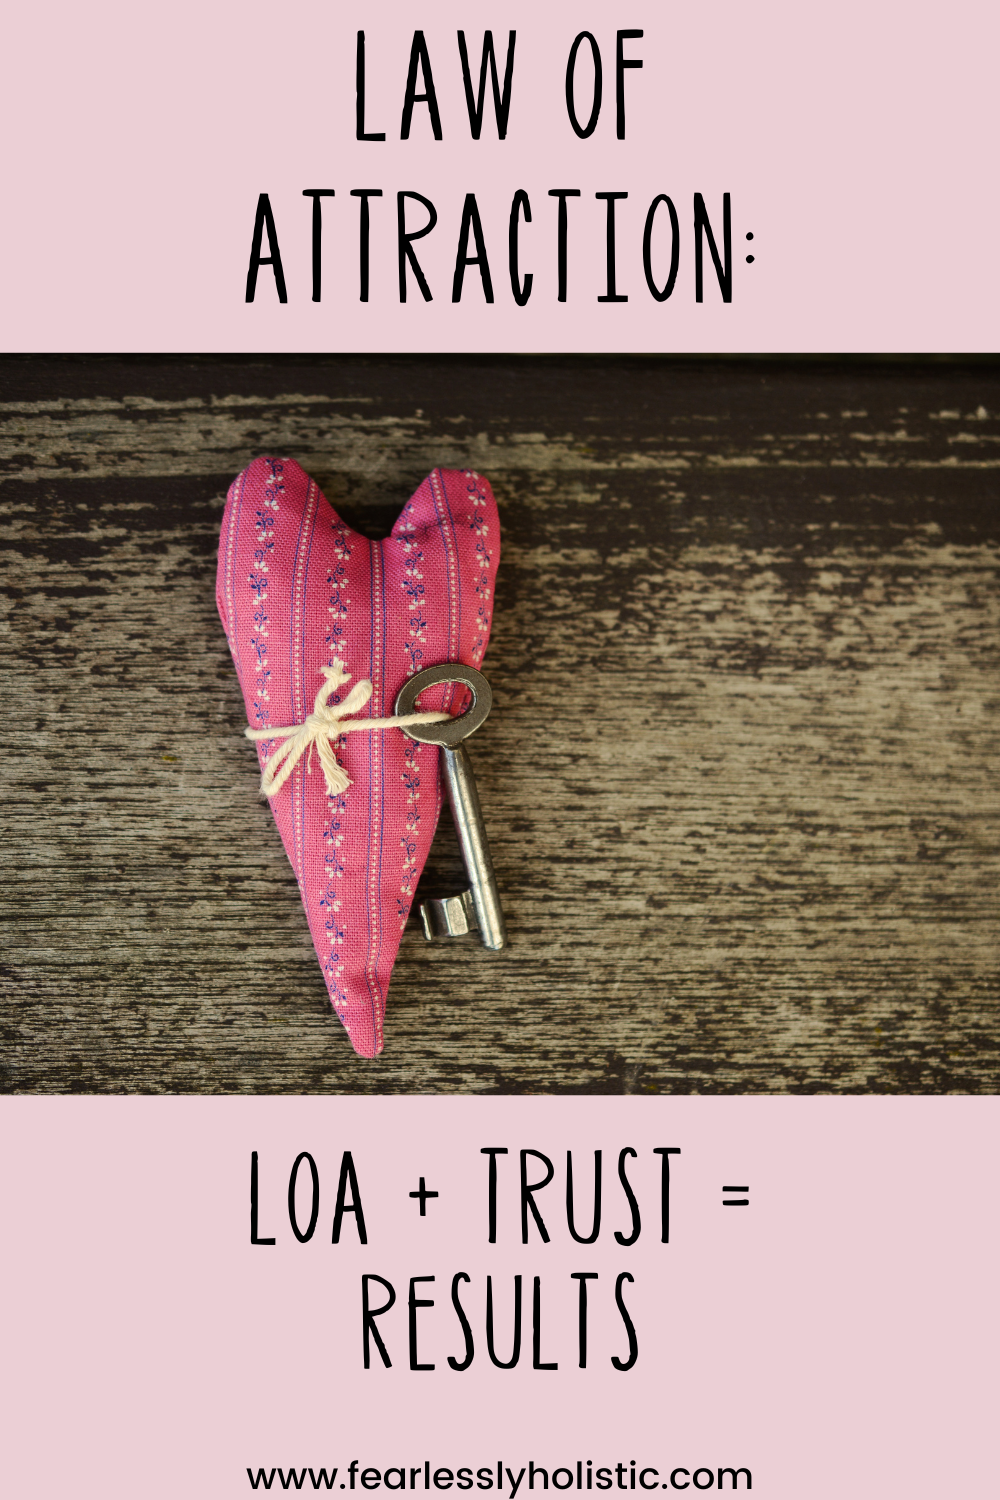 Law of Attraction: Trust The Process